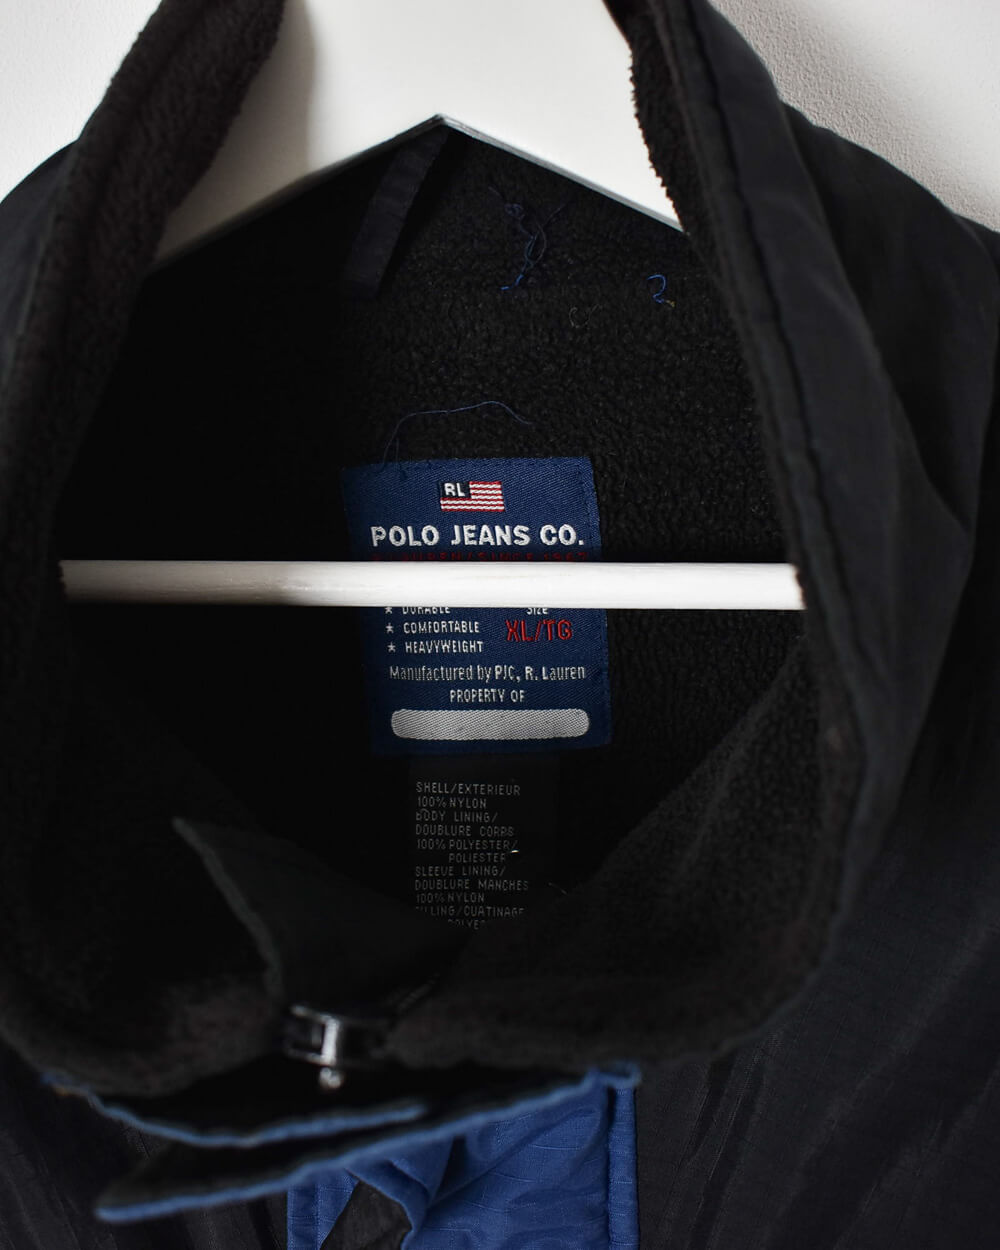 Ralph Lauren Polo Jeans Co. Fleece Lined Winter Coat - X-Large - Domno Vintage 90s, 80s, 00s Retro and Vintage Clothing 